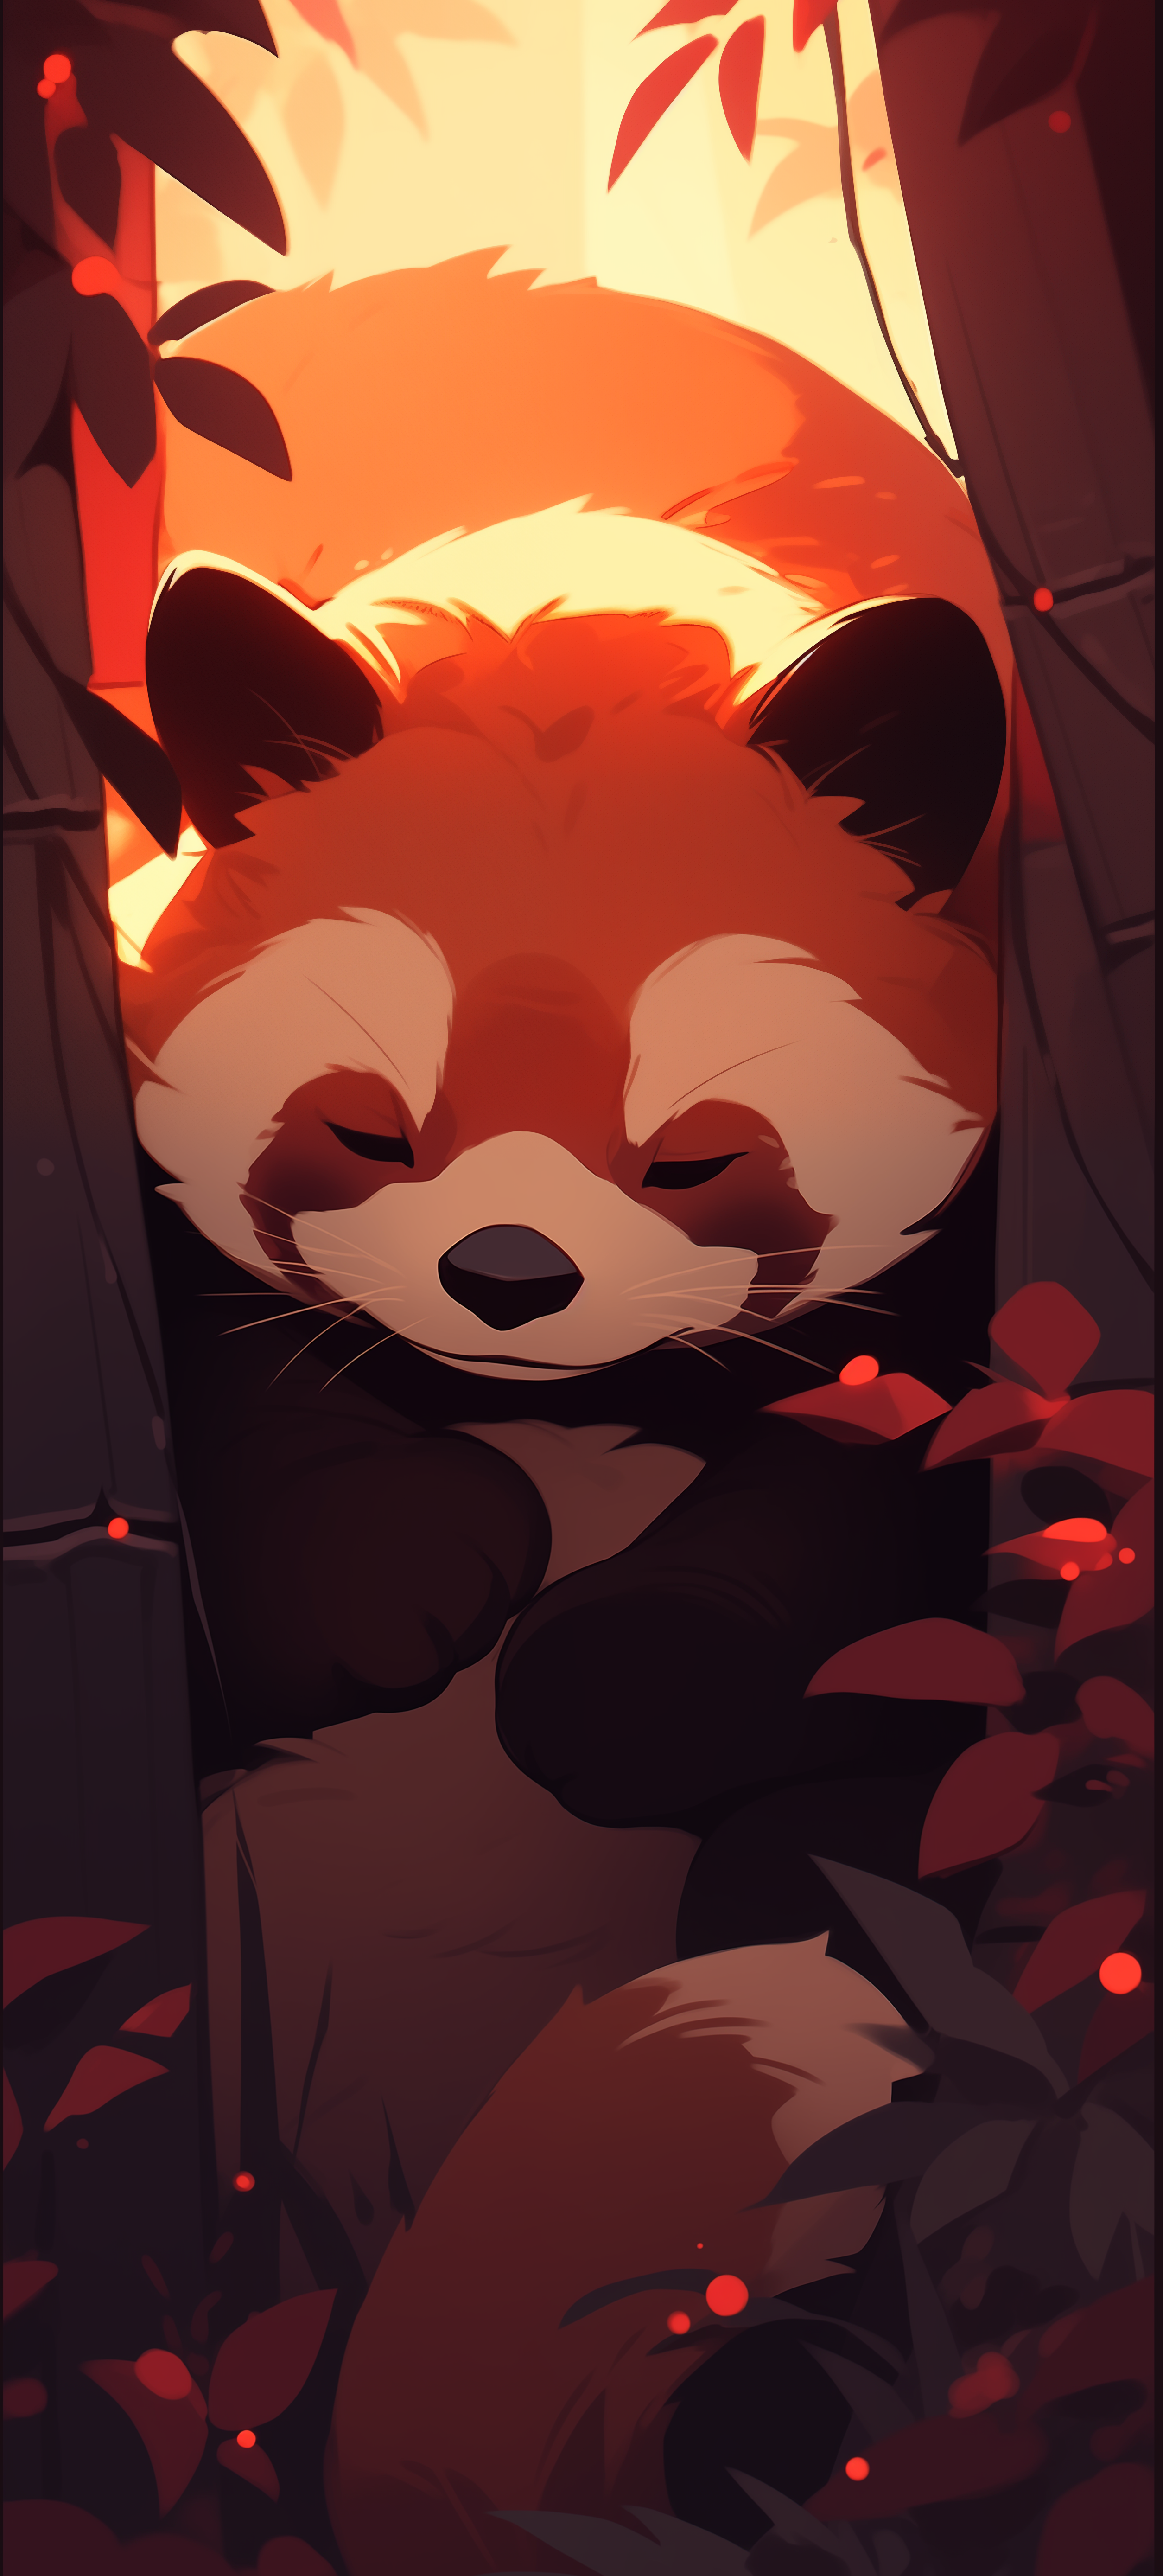 Red panda illustration in a serene forest, perfect for phone wallpaper.